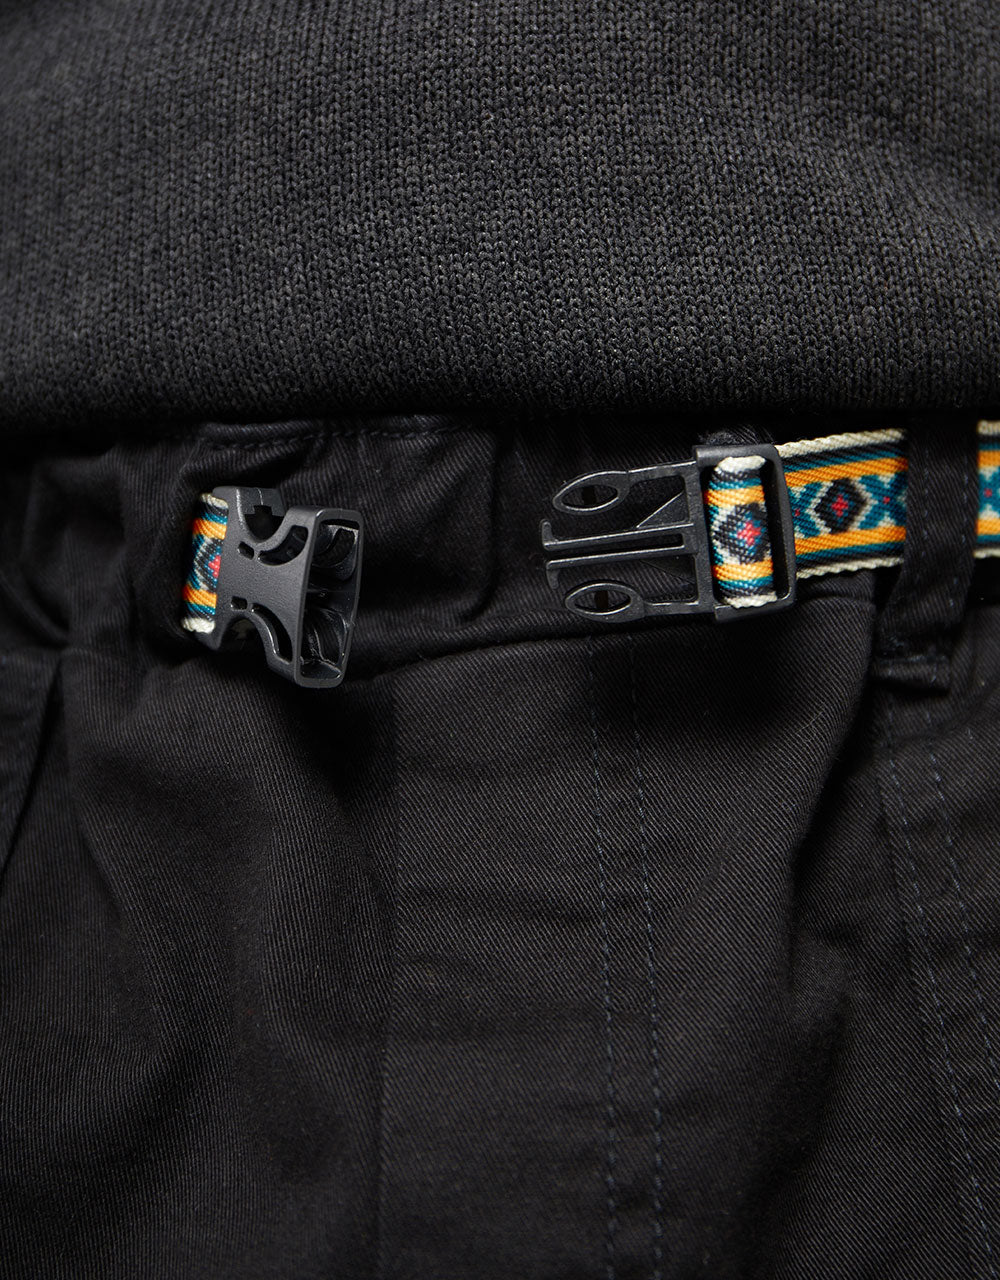 Route One Climbing Pant - Black